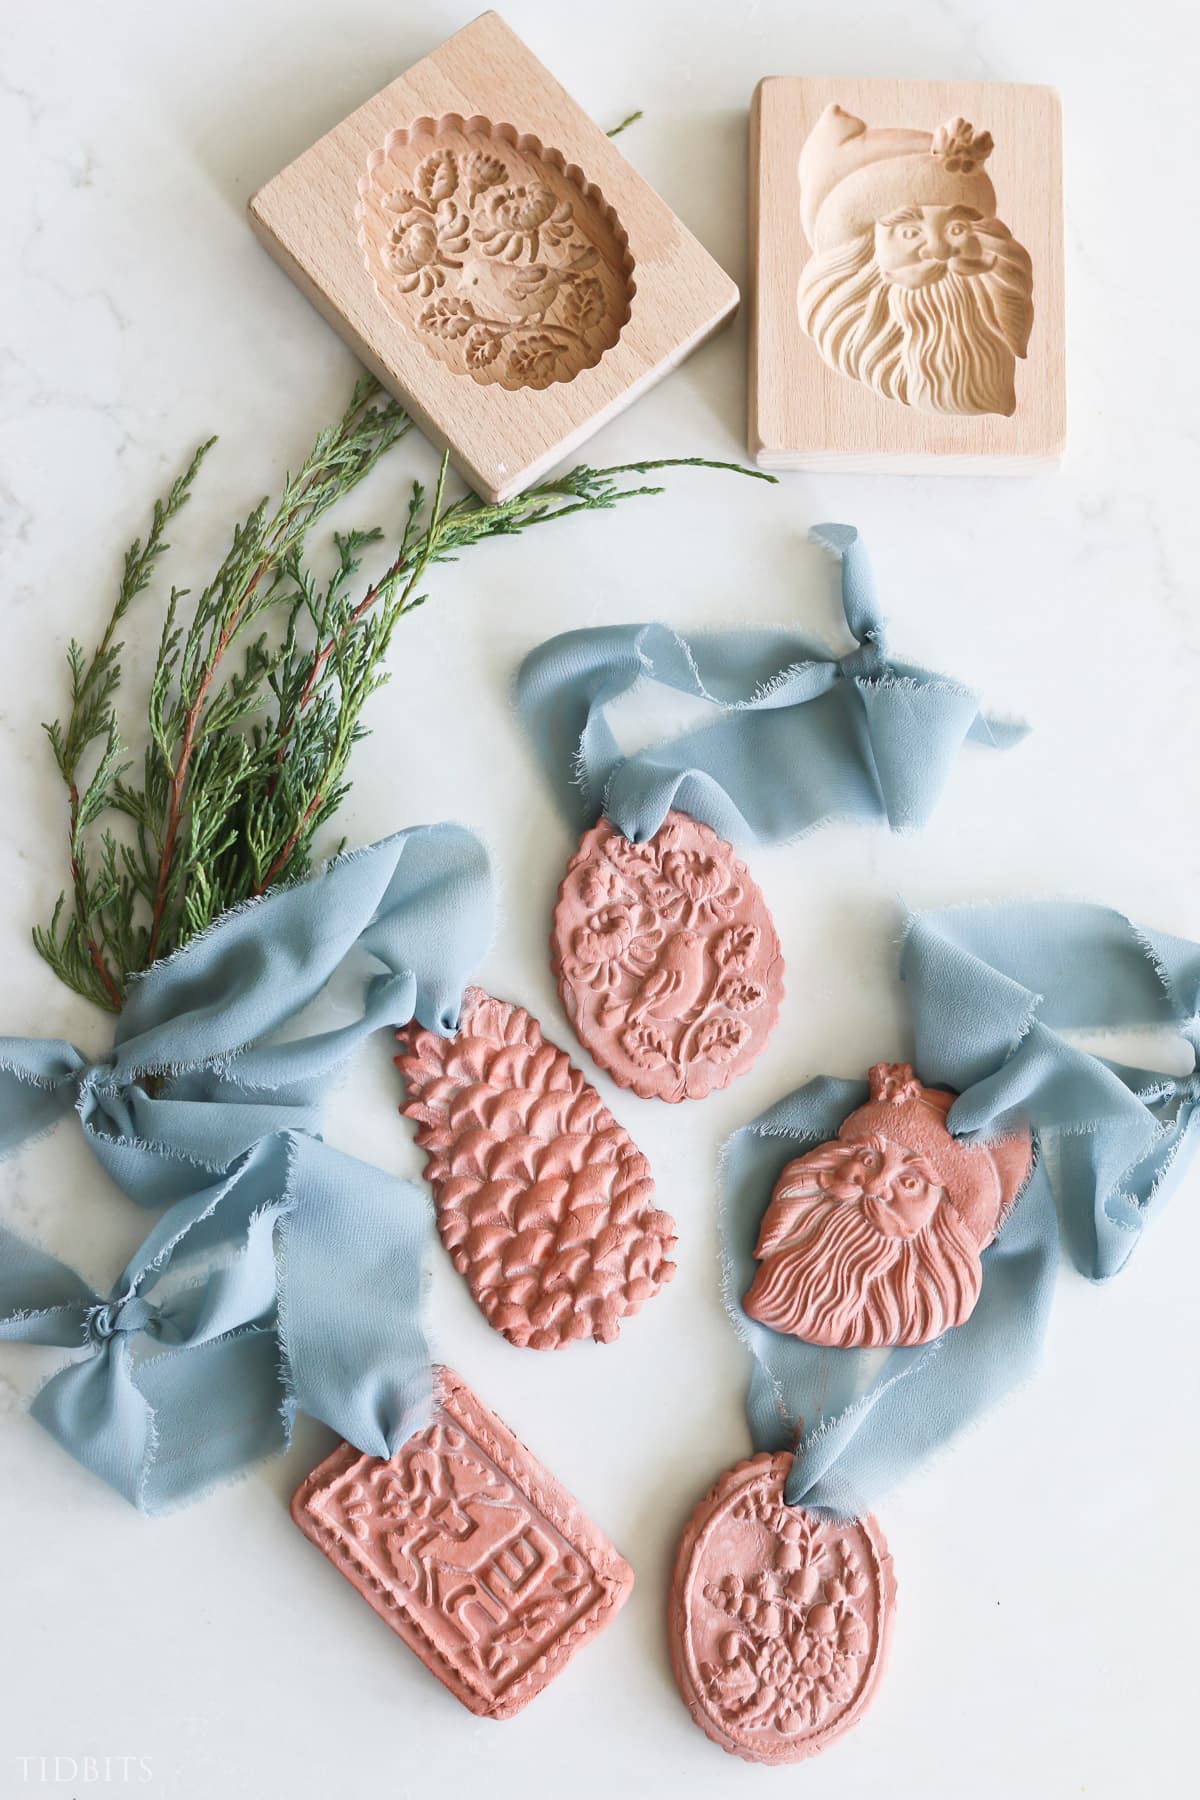 How to make Air Dry Clay Ornaments with Terracotta and White Clay - Tidbits